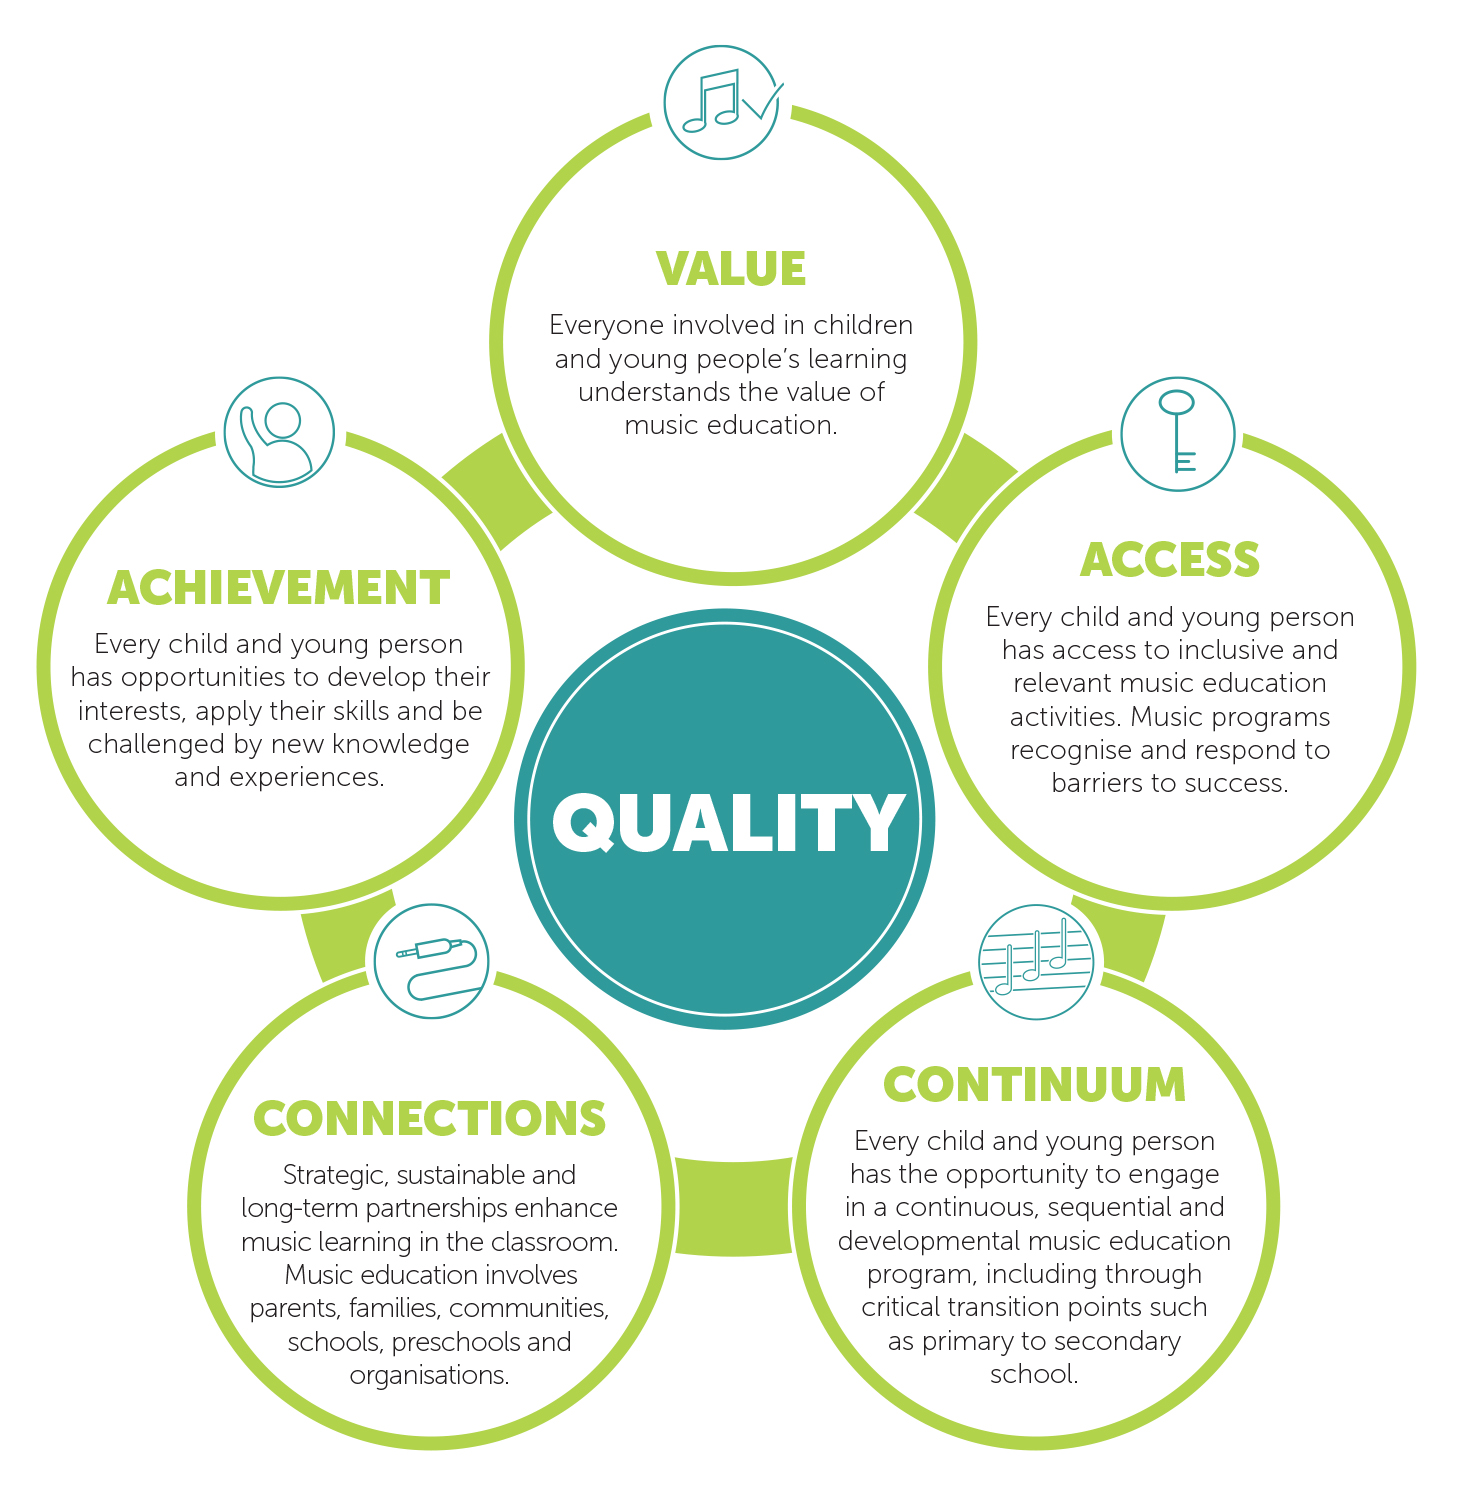 These 5 qualities are value, access, continuum, connections and achievement. Read more under the 5 qualities heading. 